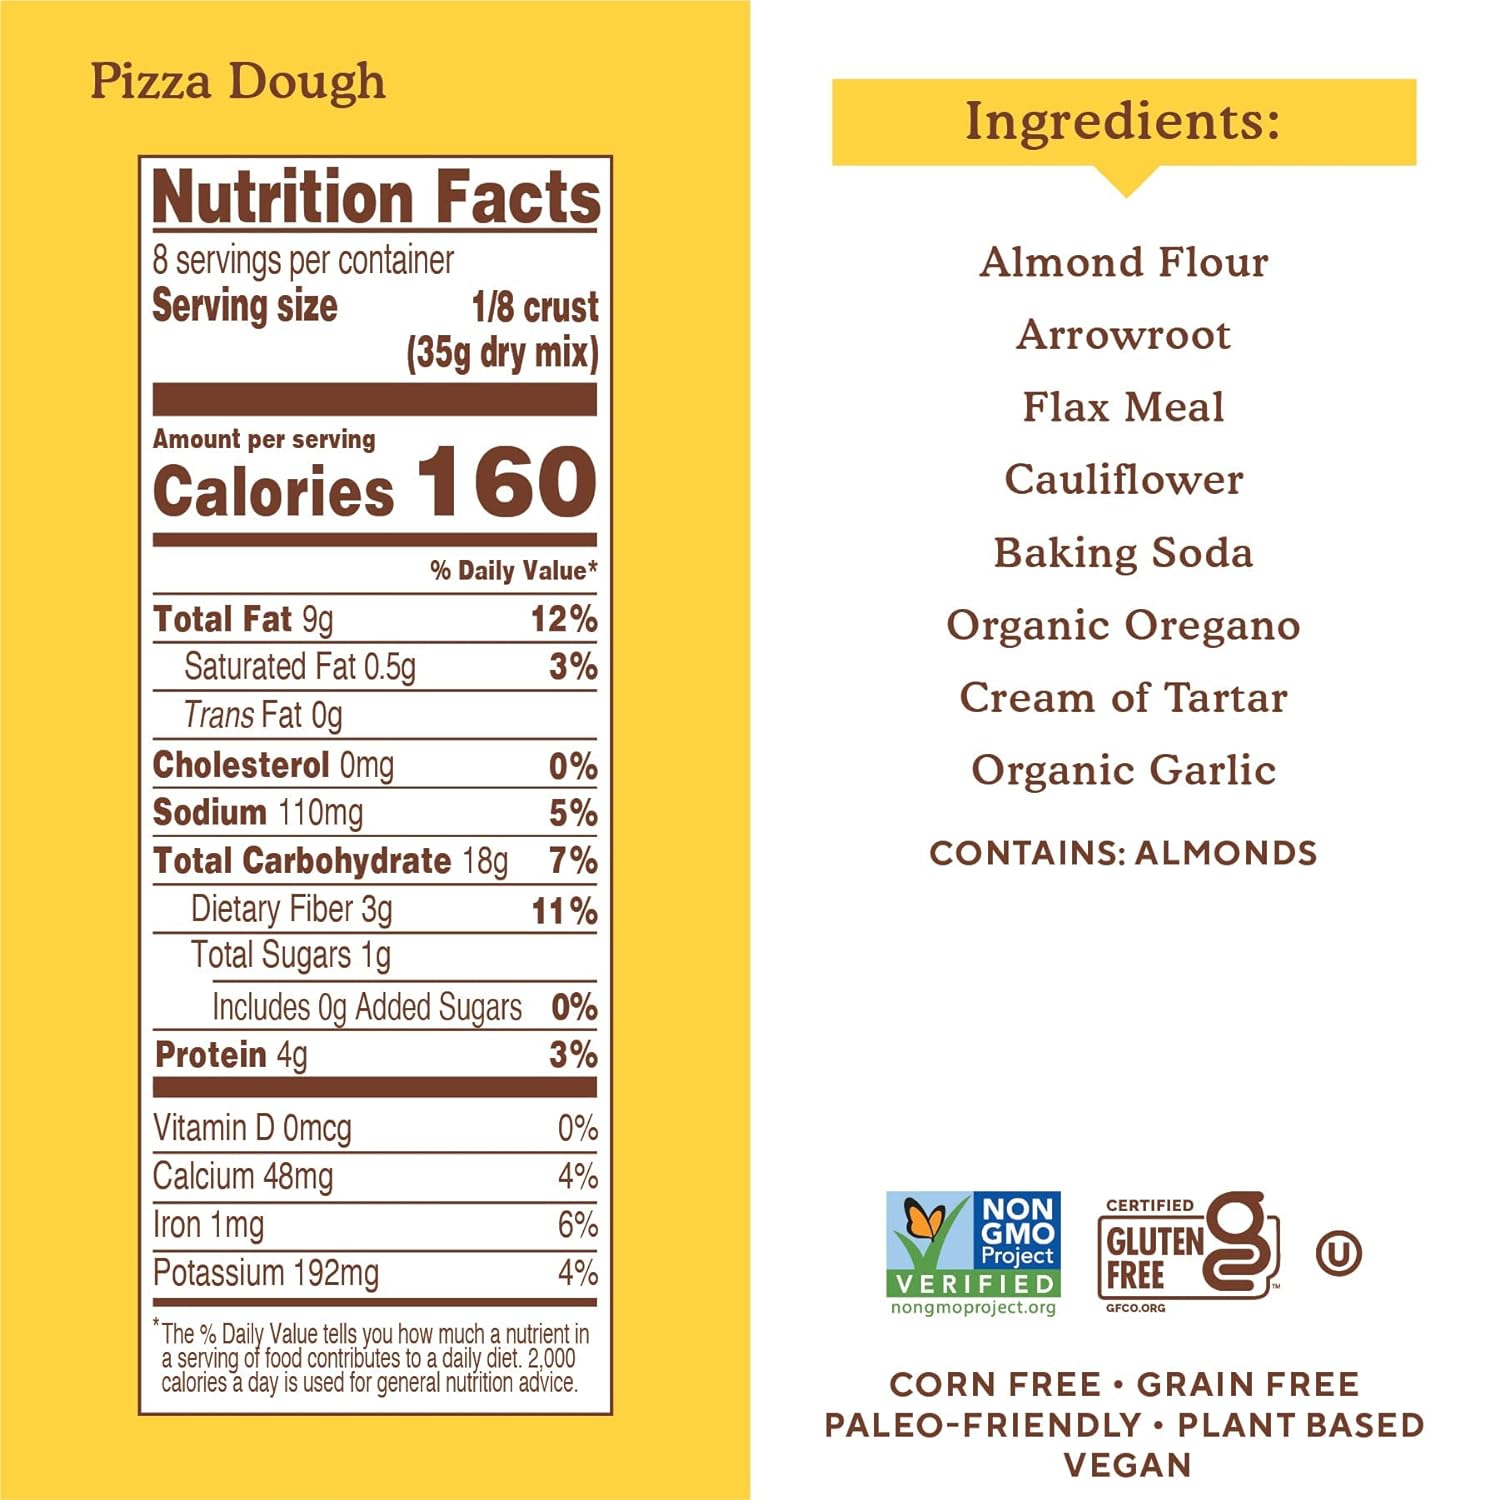 Simple Mills Almond Flour Baking Mix, Cauliflower Pizza Dough - Gluten Free, Vegan, Plant Based, 9.8 Ounce (Pack of 6) : Grocery & Gourmet Food